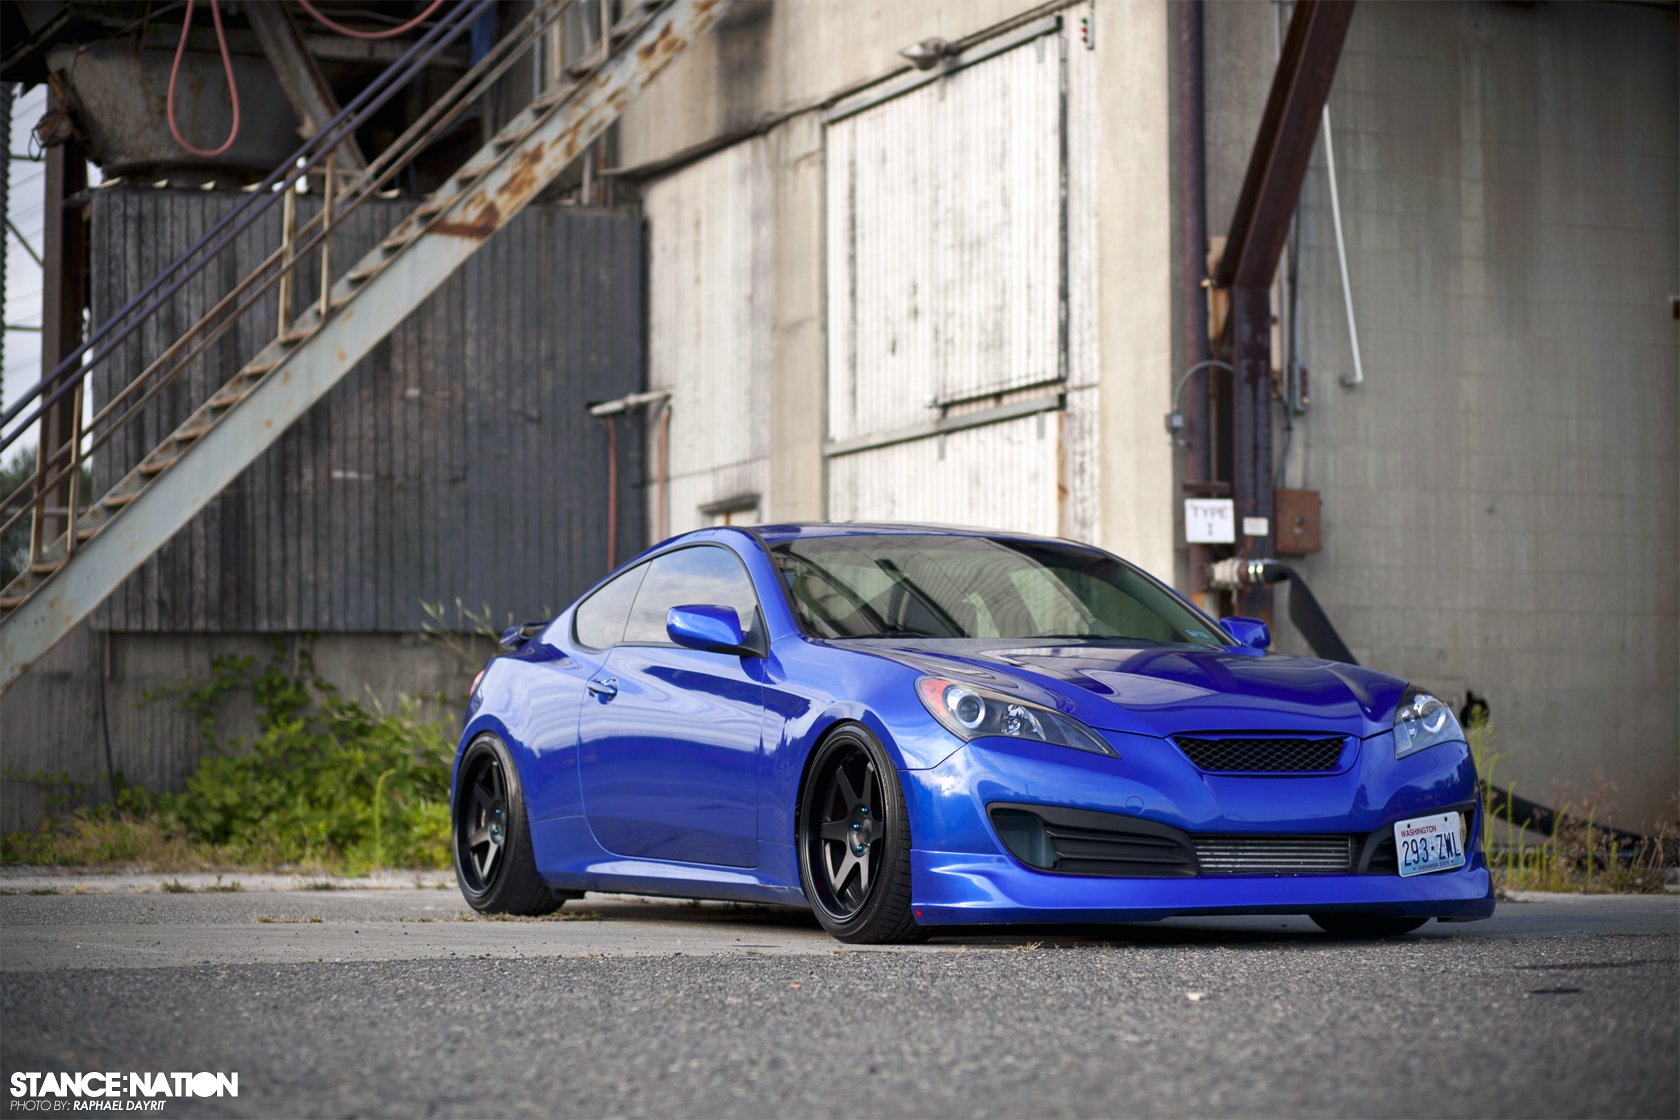 2010 Hyundai Genesis Coupe Tuning Custom Wallpapers Hd Desktop And Mobile Backgrounds